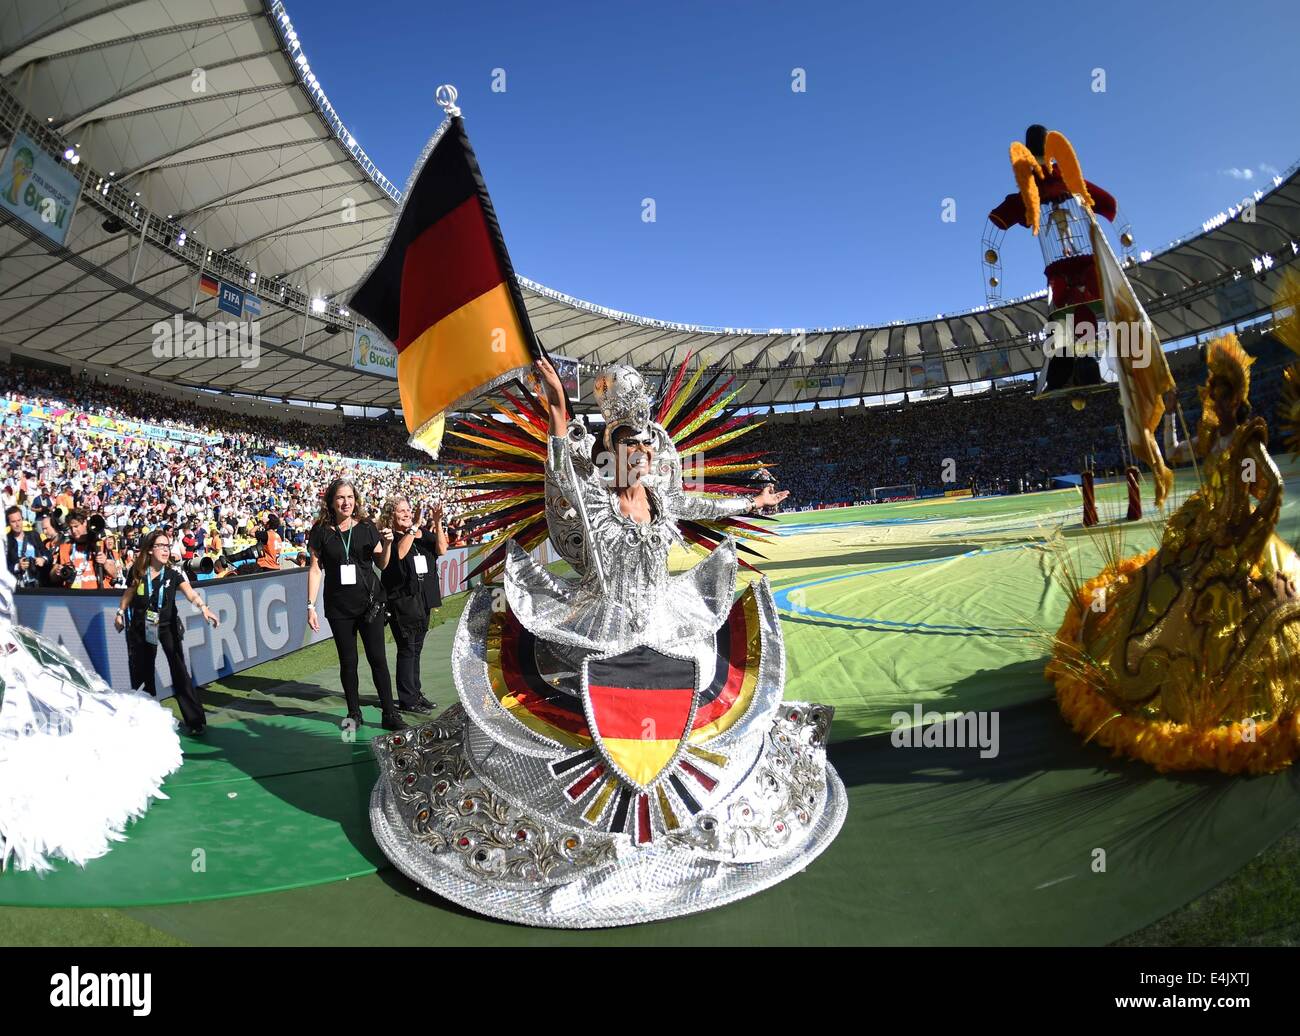 Rio De Janeiro, Brazil. 13th July, 2014. A dancer carries a Germany's national flag during the closing ceremony before the final match between Germany and Argentina of 2014 FIFA World Cup at the Estadio do Maracana Stadium in Rio de Janeiro, Brazil, on July 13, 2014. Credit:  Liu Dawei/Xinhua/Alamy Live News Stock Photo